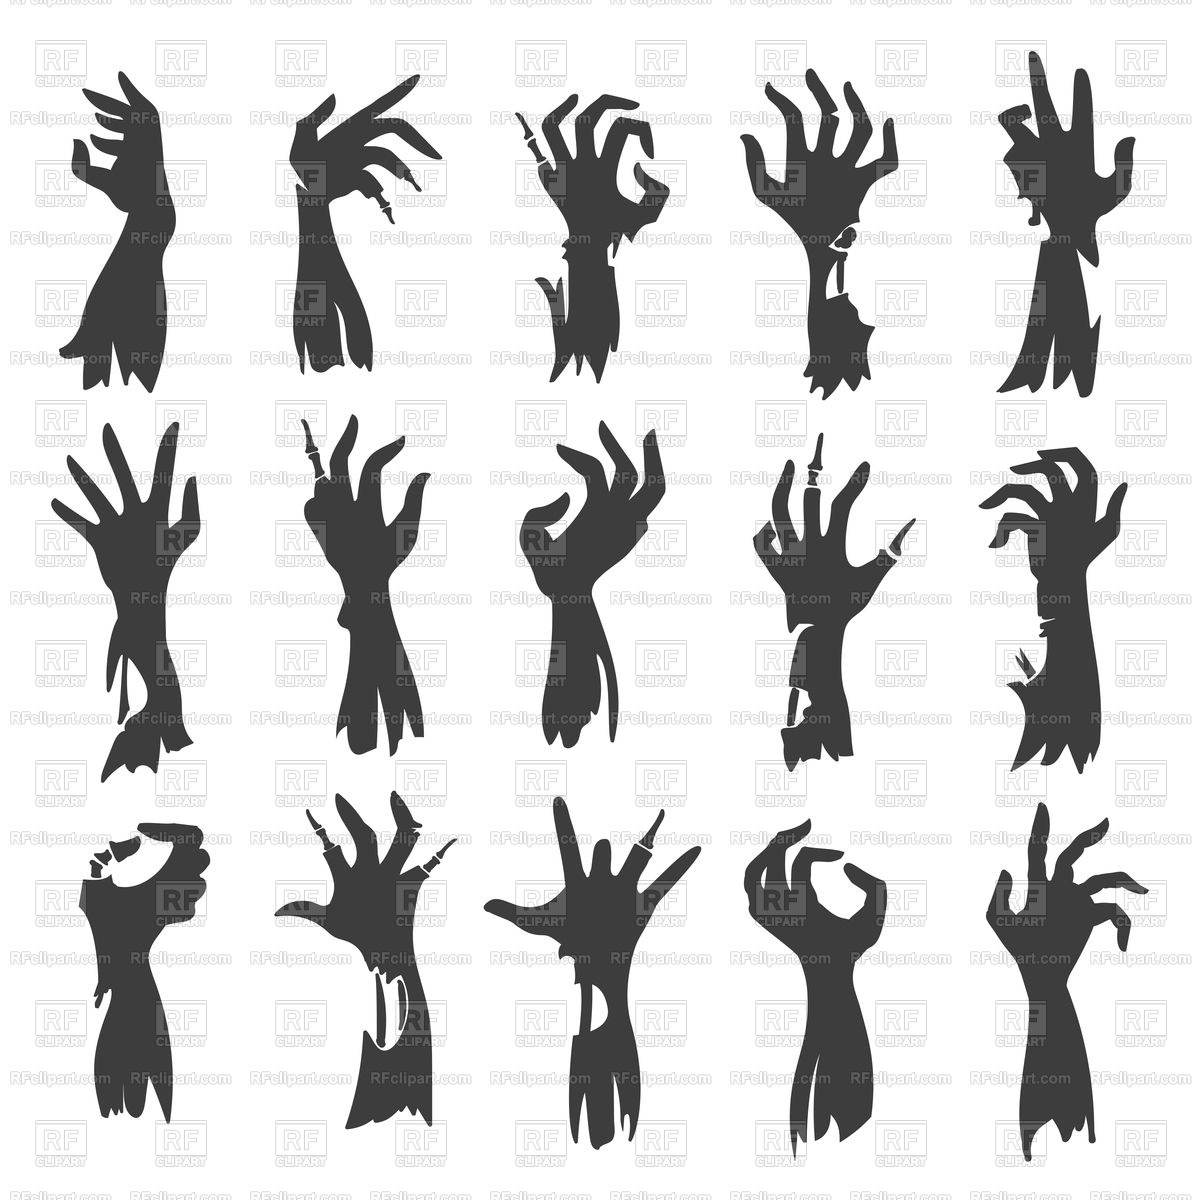 Zombie Hand Vector At Collection Of Zombie Hand Vector Free For Personal Use